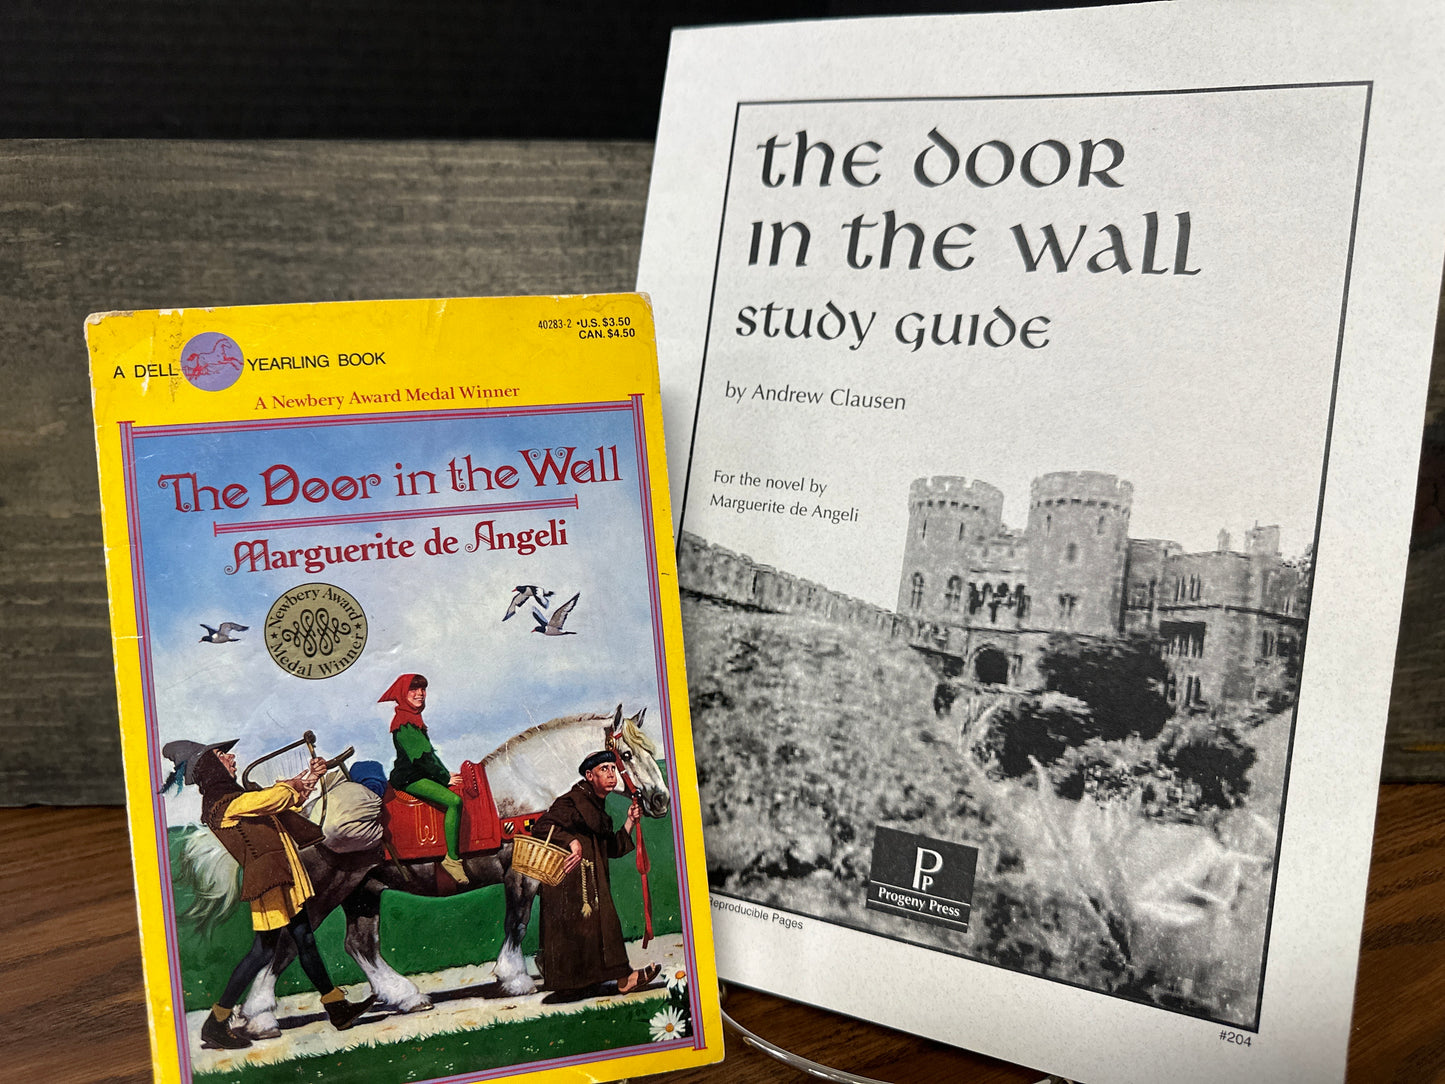 The Door in the Wall study guide/book set